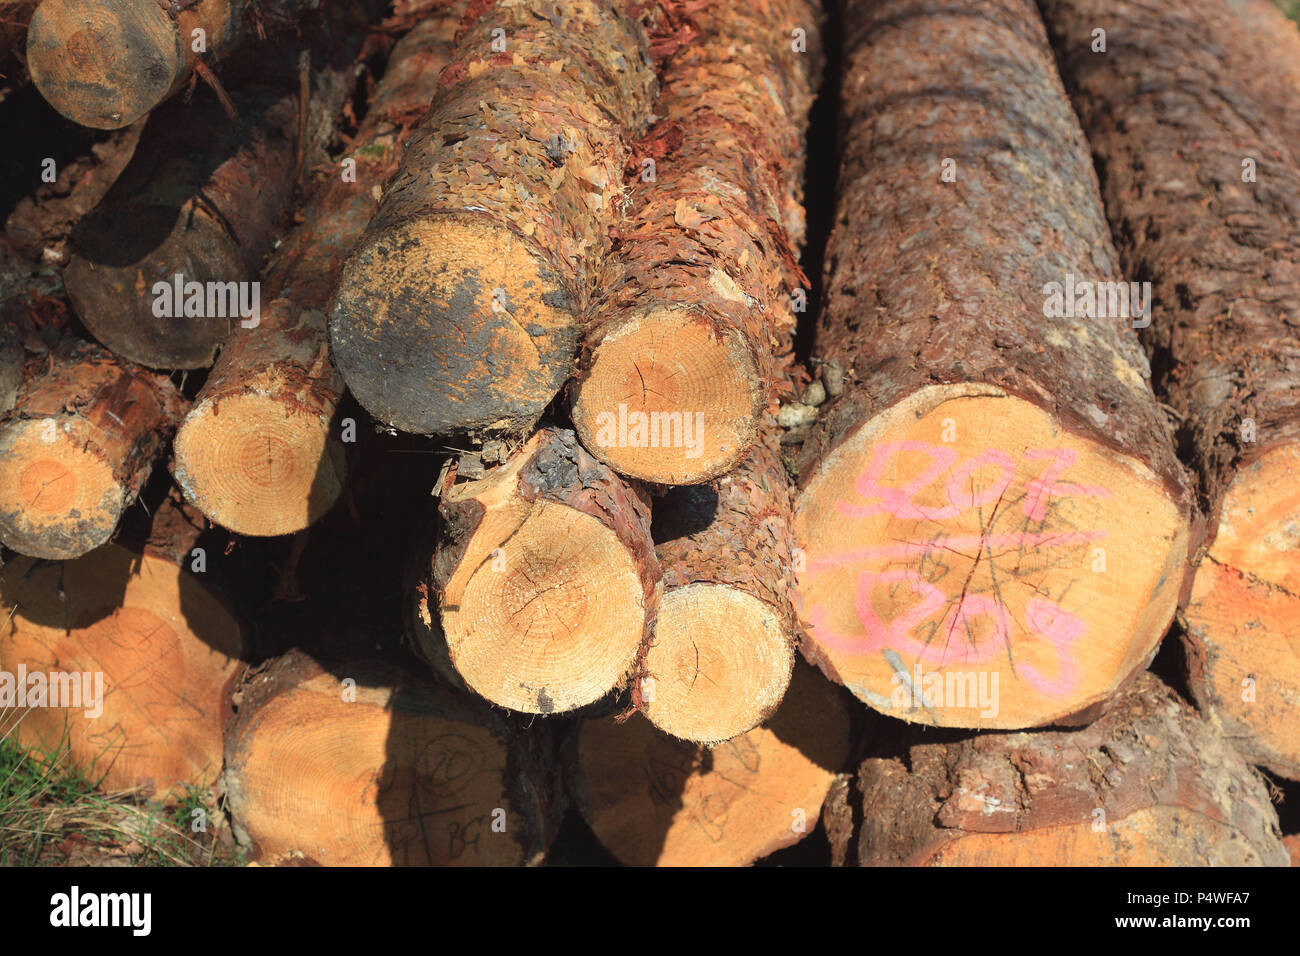 Logs in the forest, long wood, wood storage Stock Photo